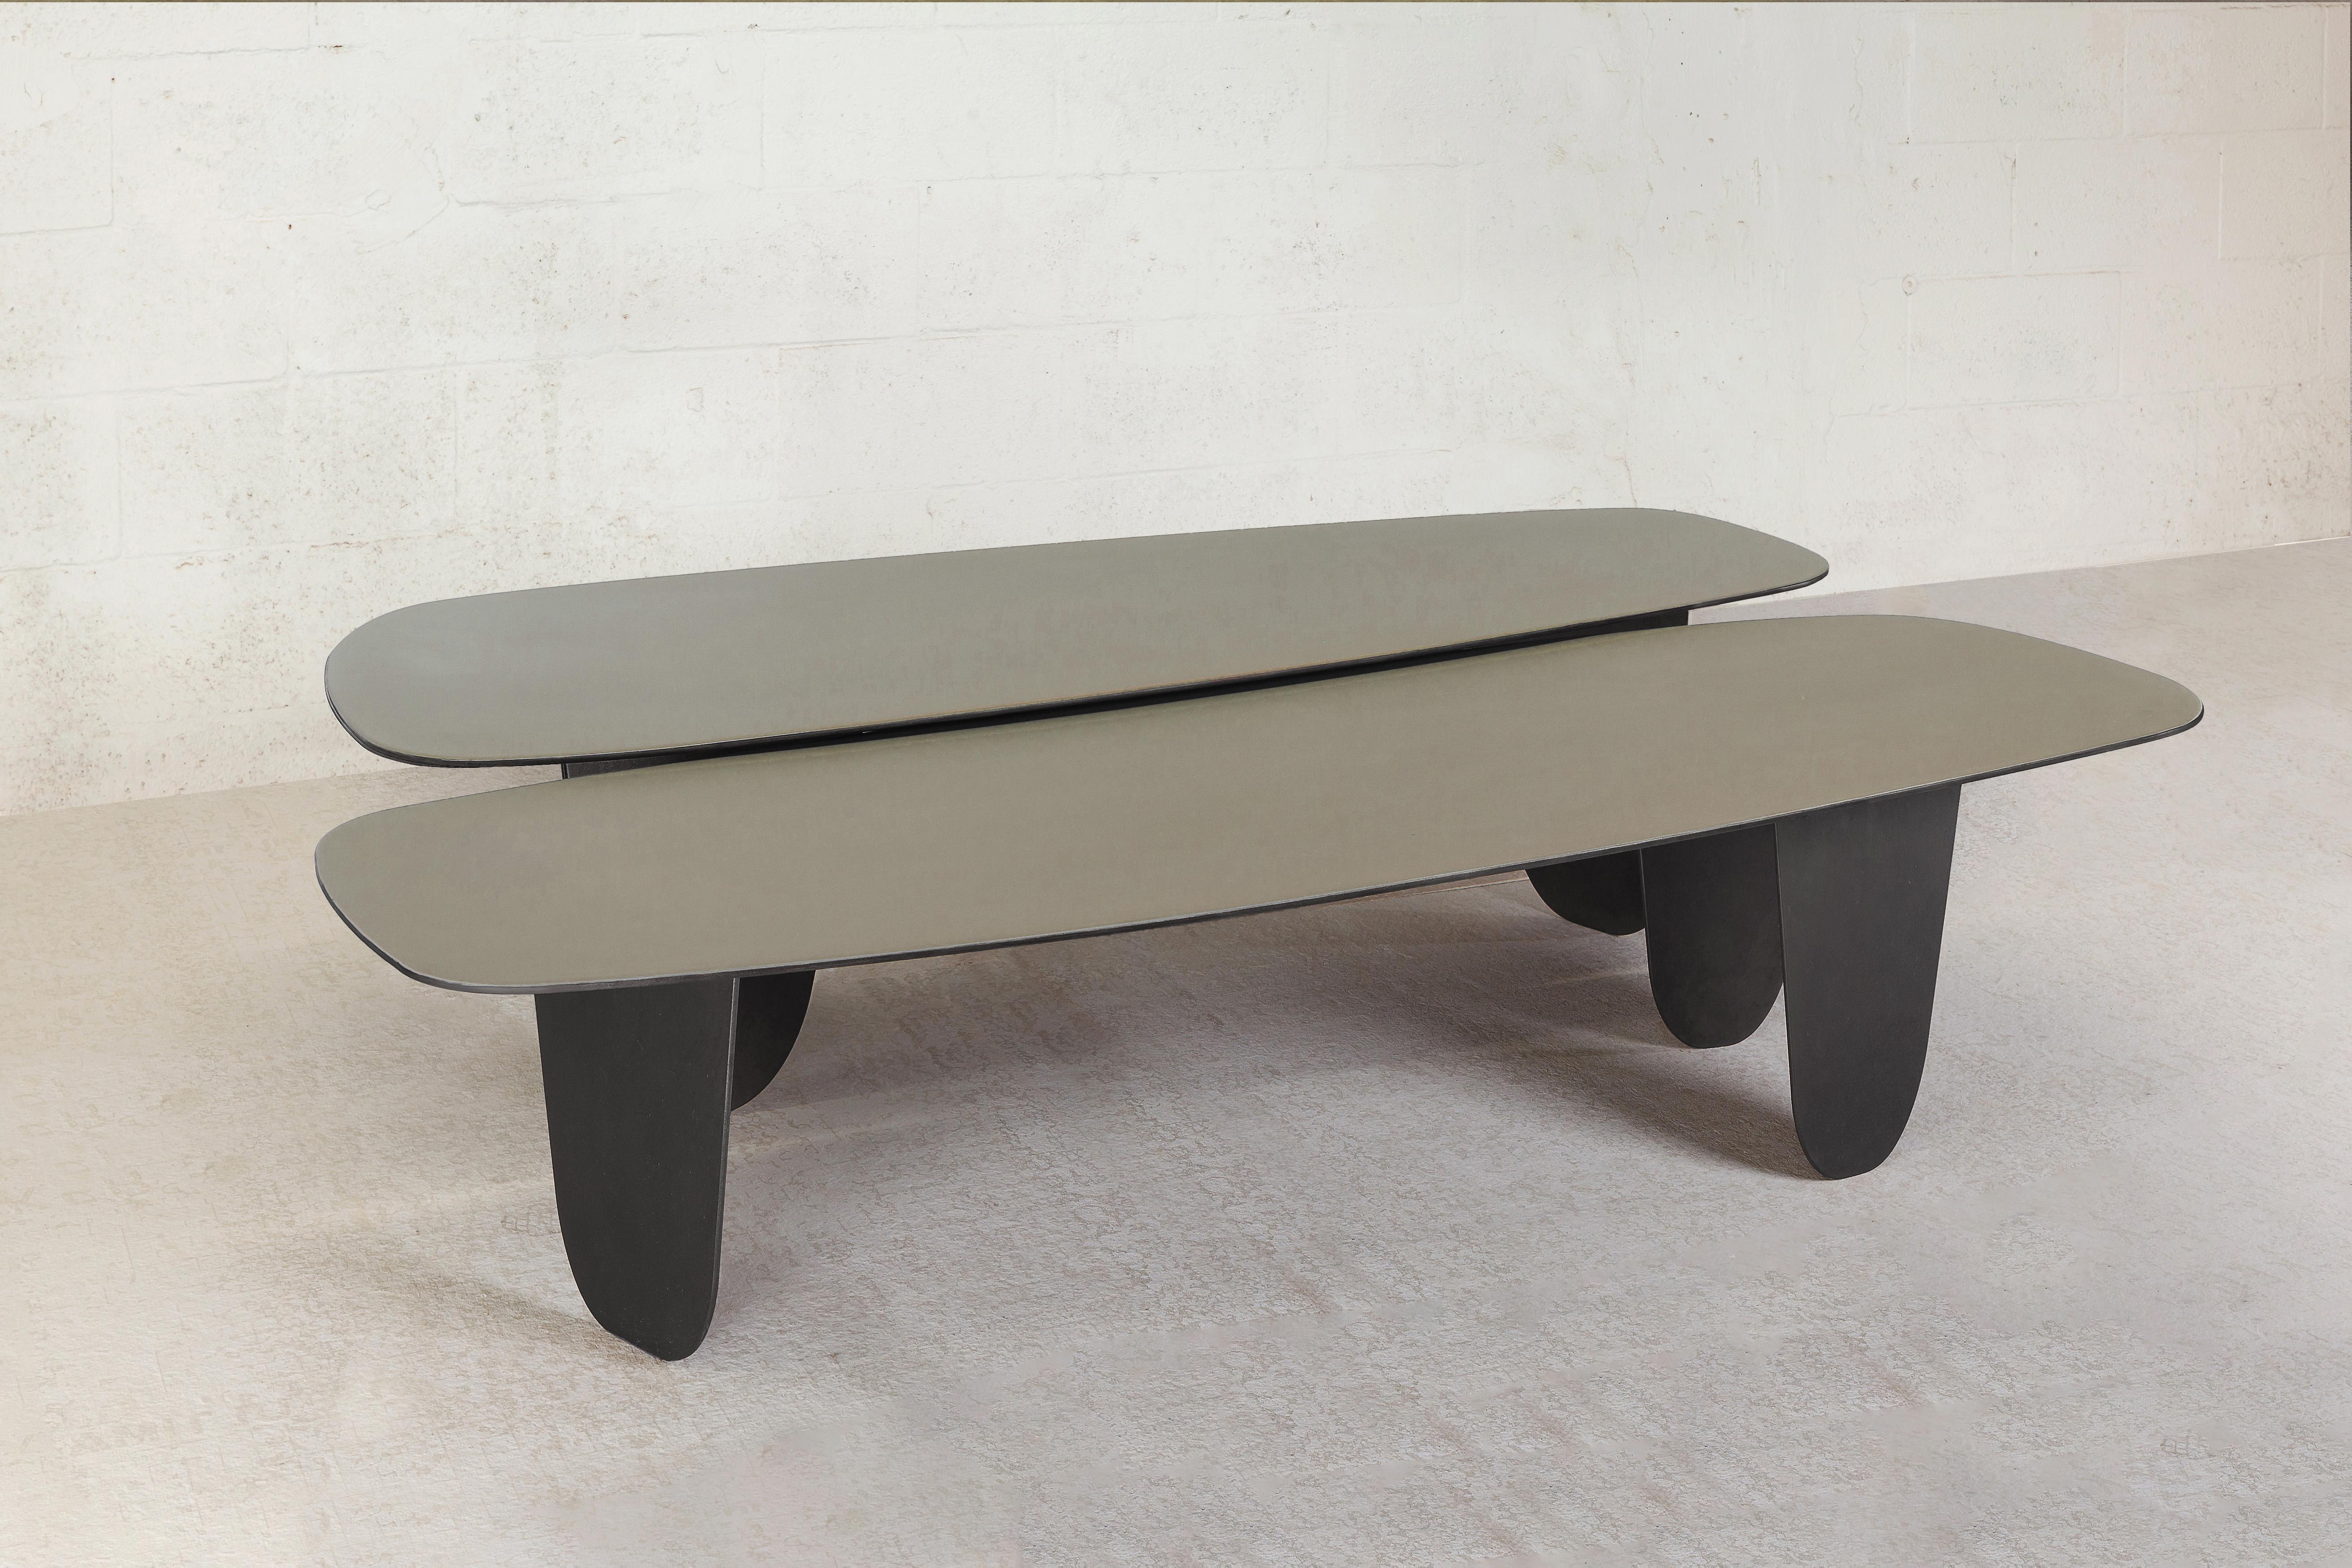 Patinated Contemporary Freeform Minimalist Steel and Resin Low Tables by Vivian Carbonell For Sale